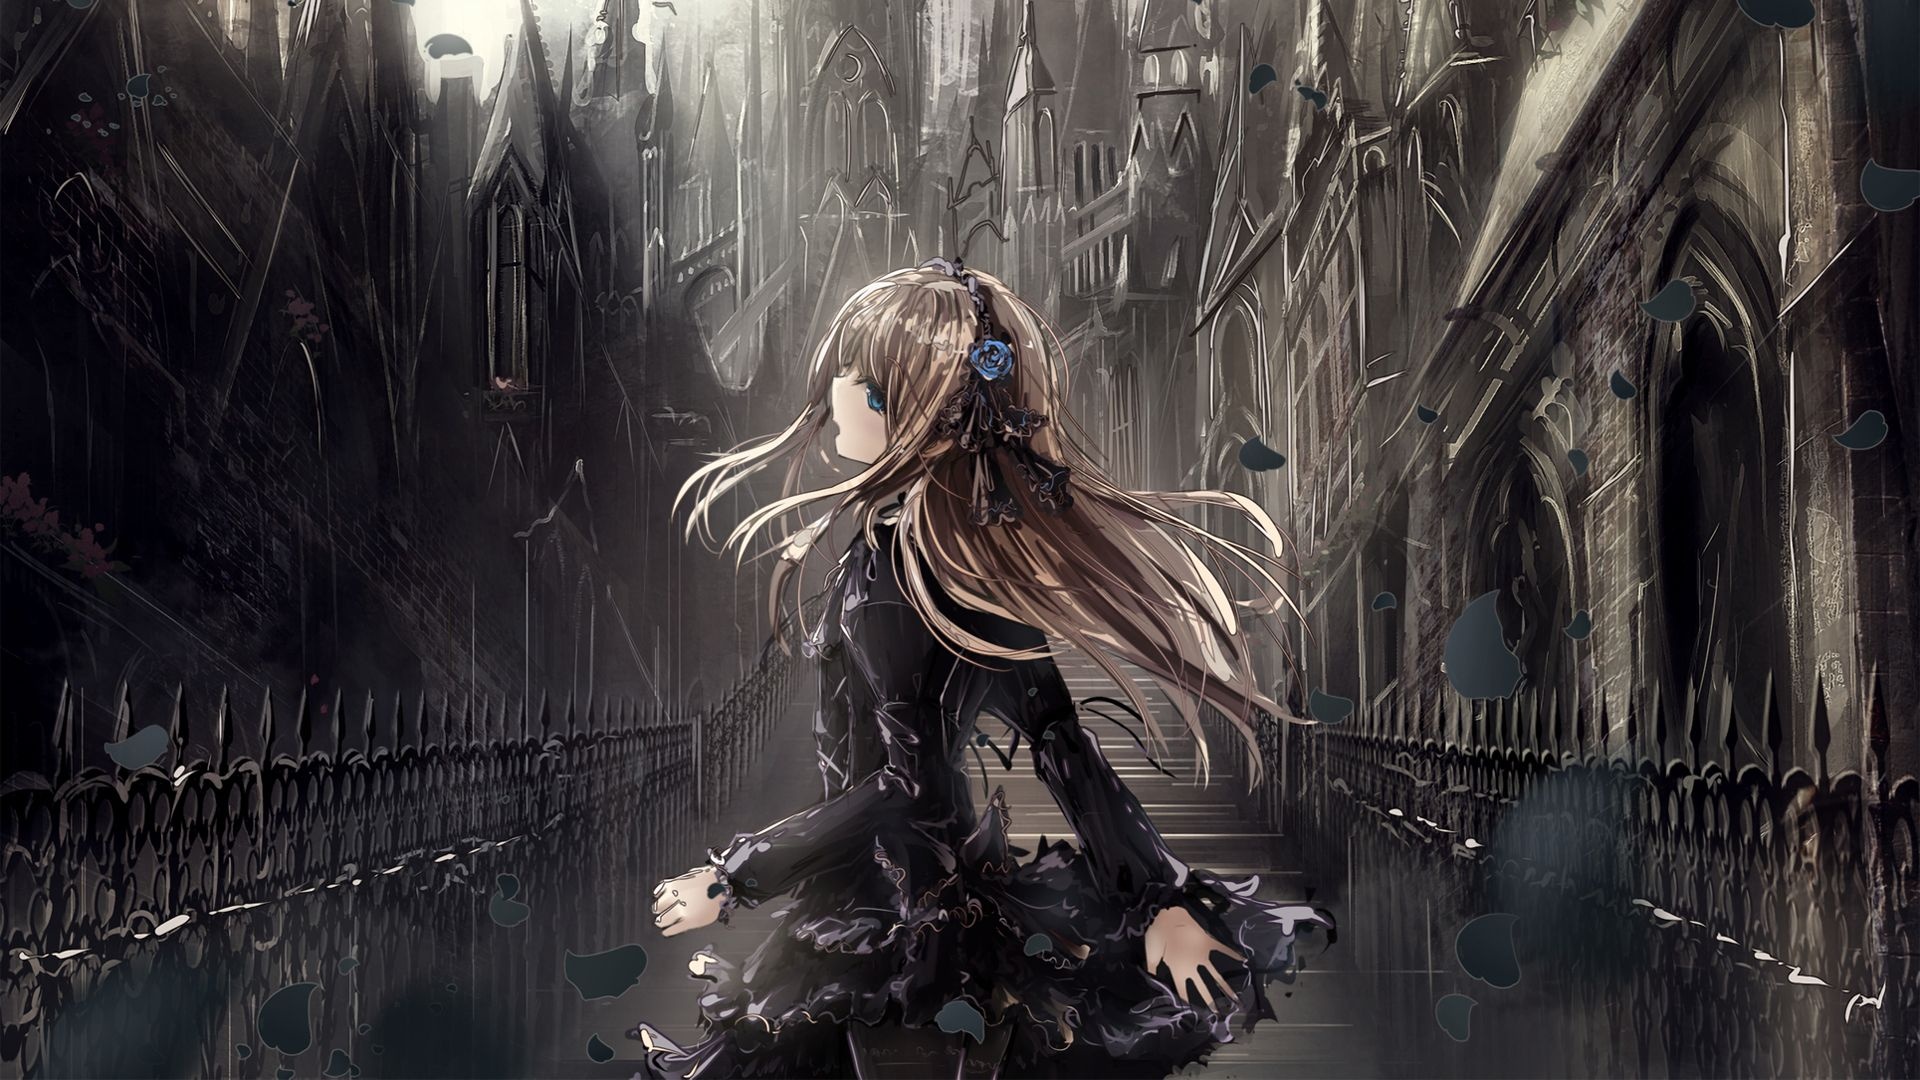 Goth Girl: Rozen Maiden, Suigintou, A Japanese manga series written and illustrated by Peach-Pit. 1920x1080 Full HD Wallpaper.